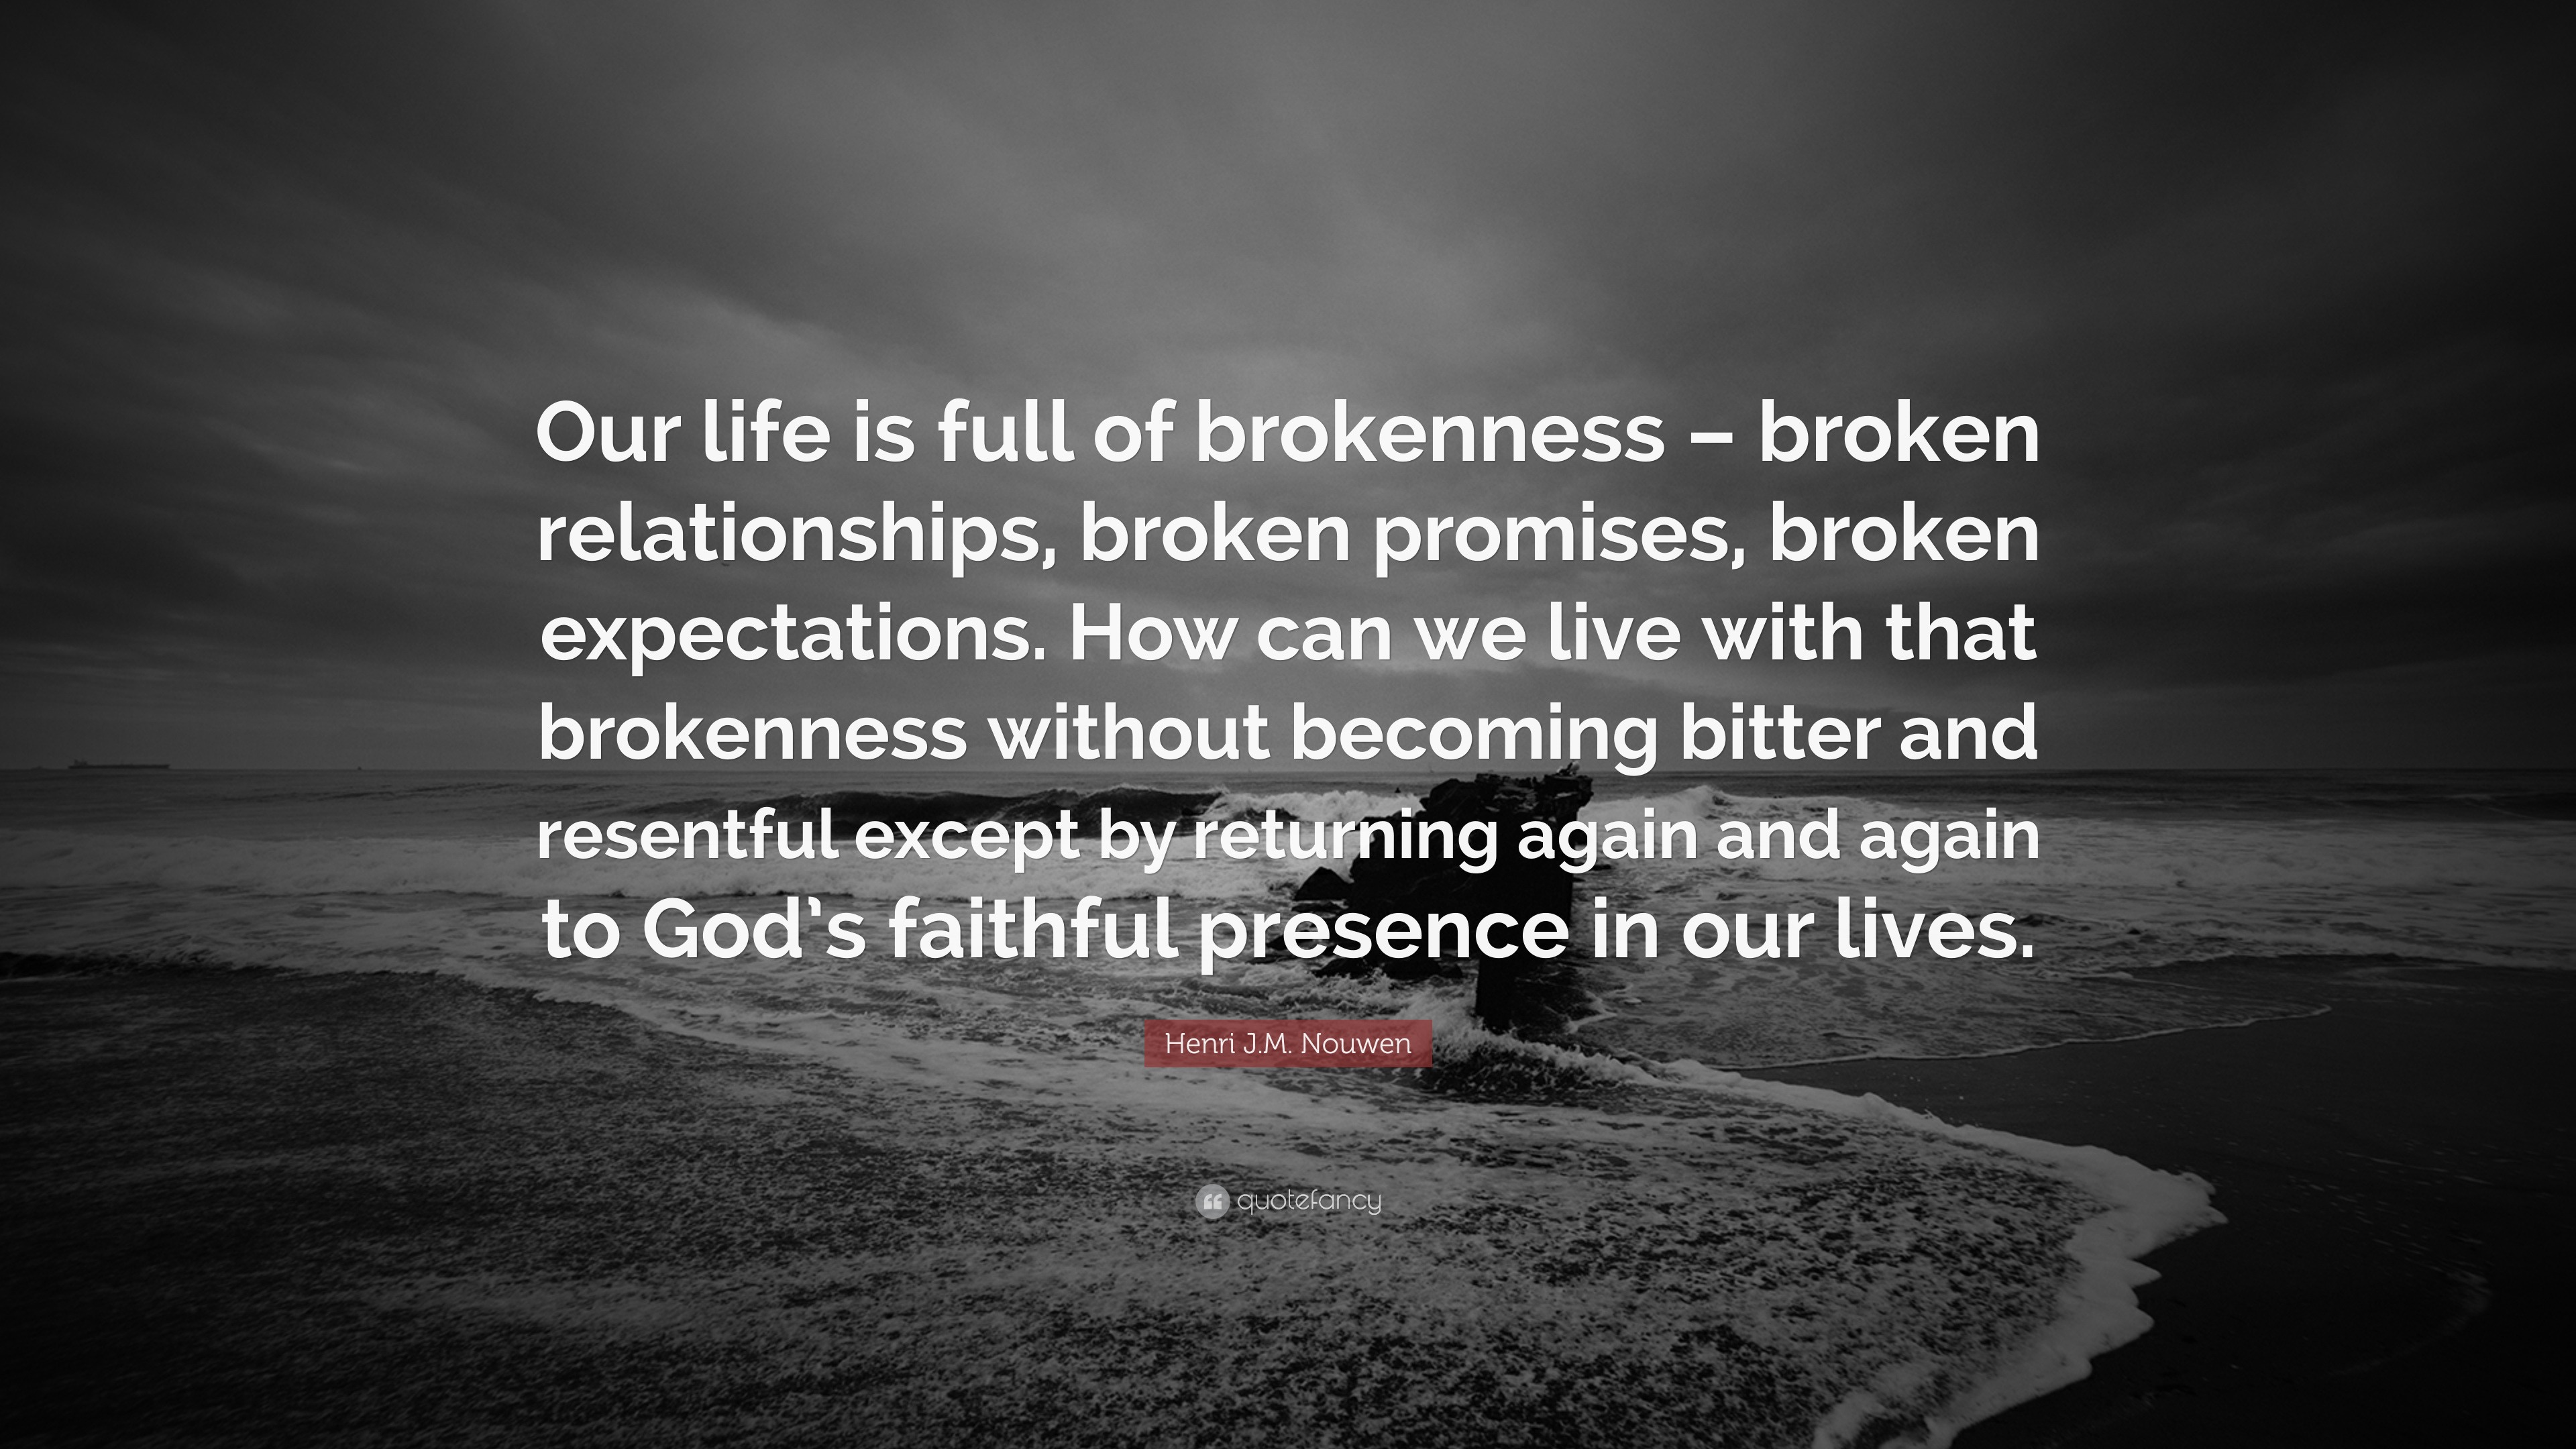 4758263 Henri J M Nouwen Quote Our life is full of brokenness broken